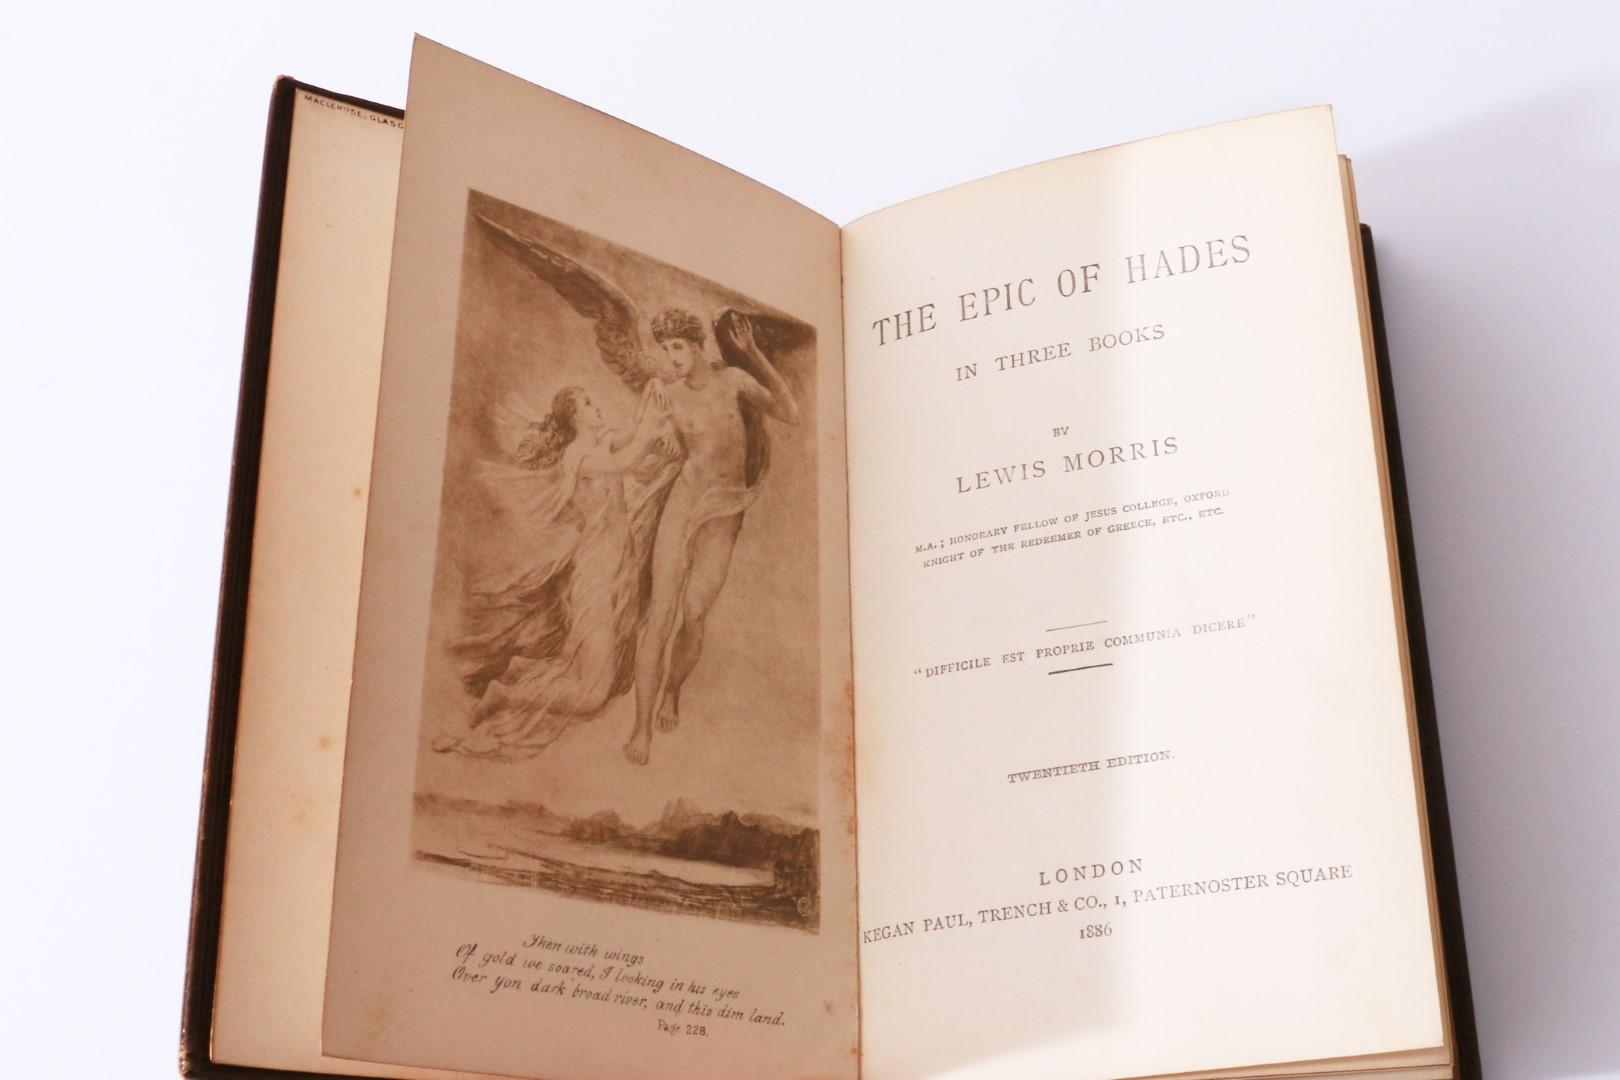 Lewis Morris - The Epic of Hades - Kegan Paul, Trench & Co., 1886, 20th Edition.